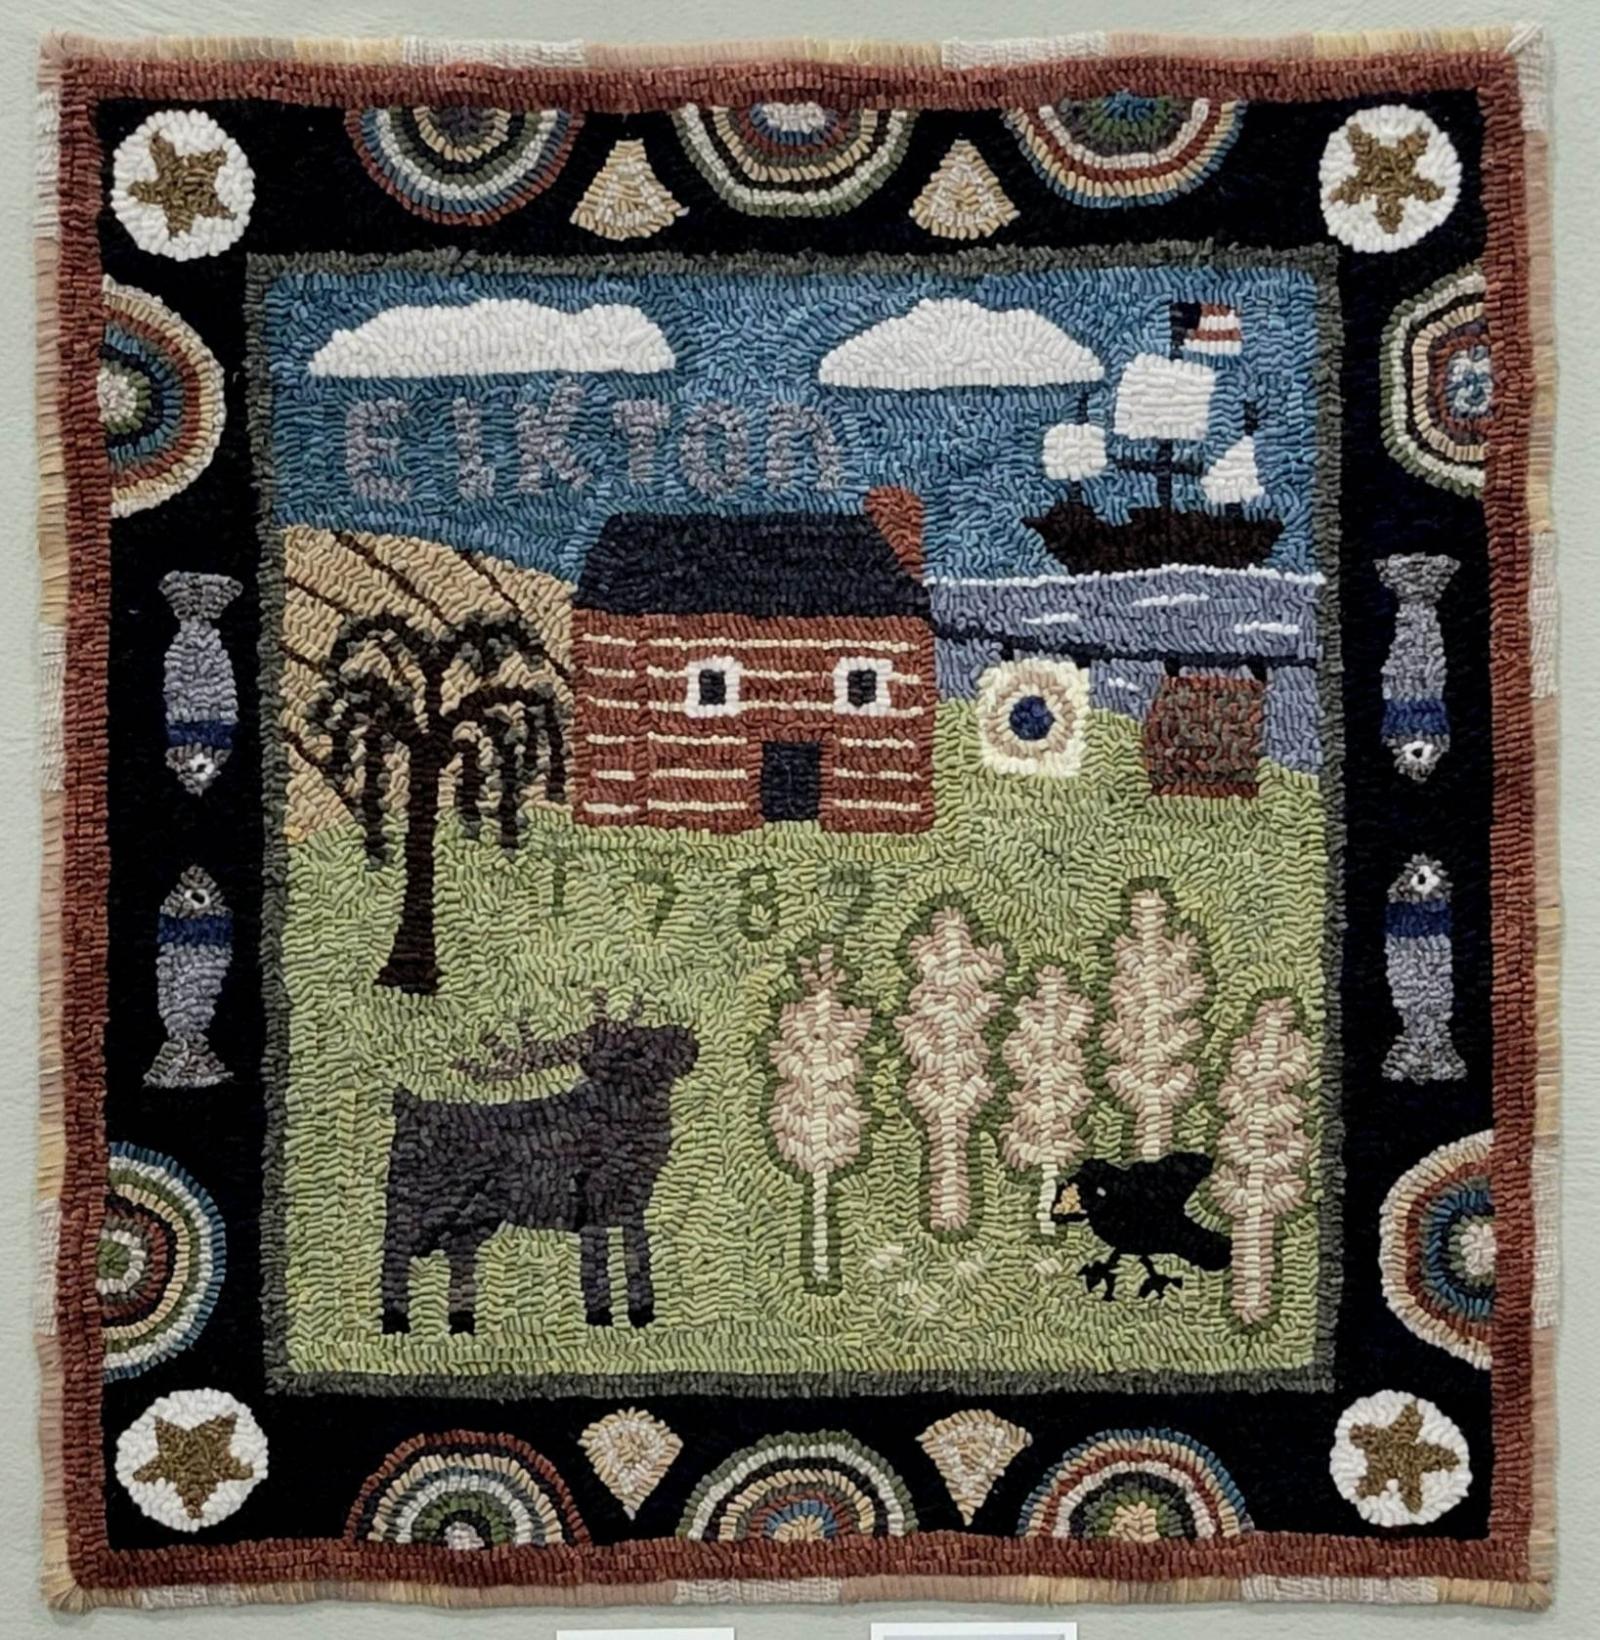 A traditional wool rug hooked rug created using hand-dyed wool on linen. The design depicts a daily scene in early Elkton, established in 1787. Fishing and wheat crops, the daily wash on the line outside the log cabin, a view of the Elk River in the background where a ship sails by. The design uses many traditional techniques and motifs. The piece is on display in Elkton at the Historical Society.